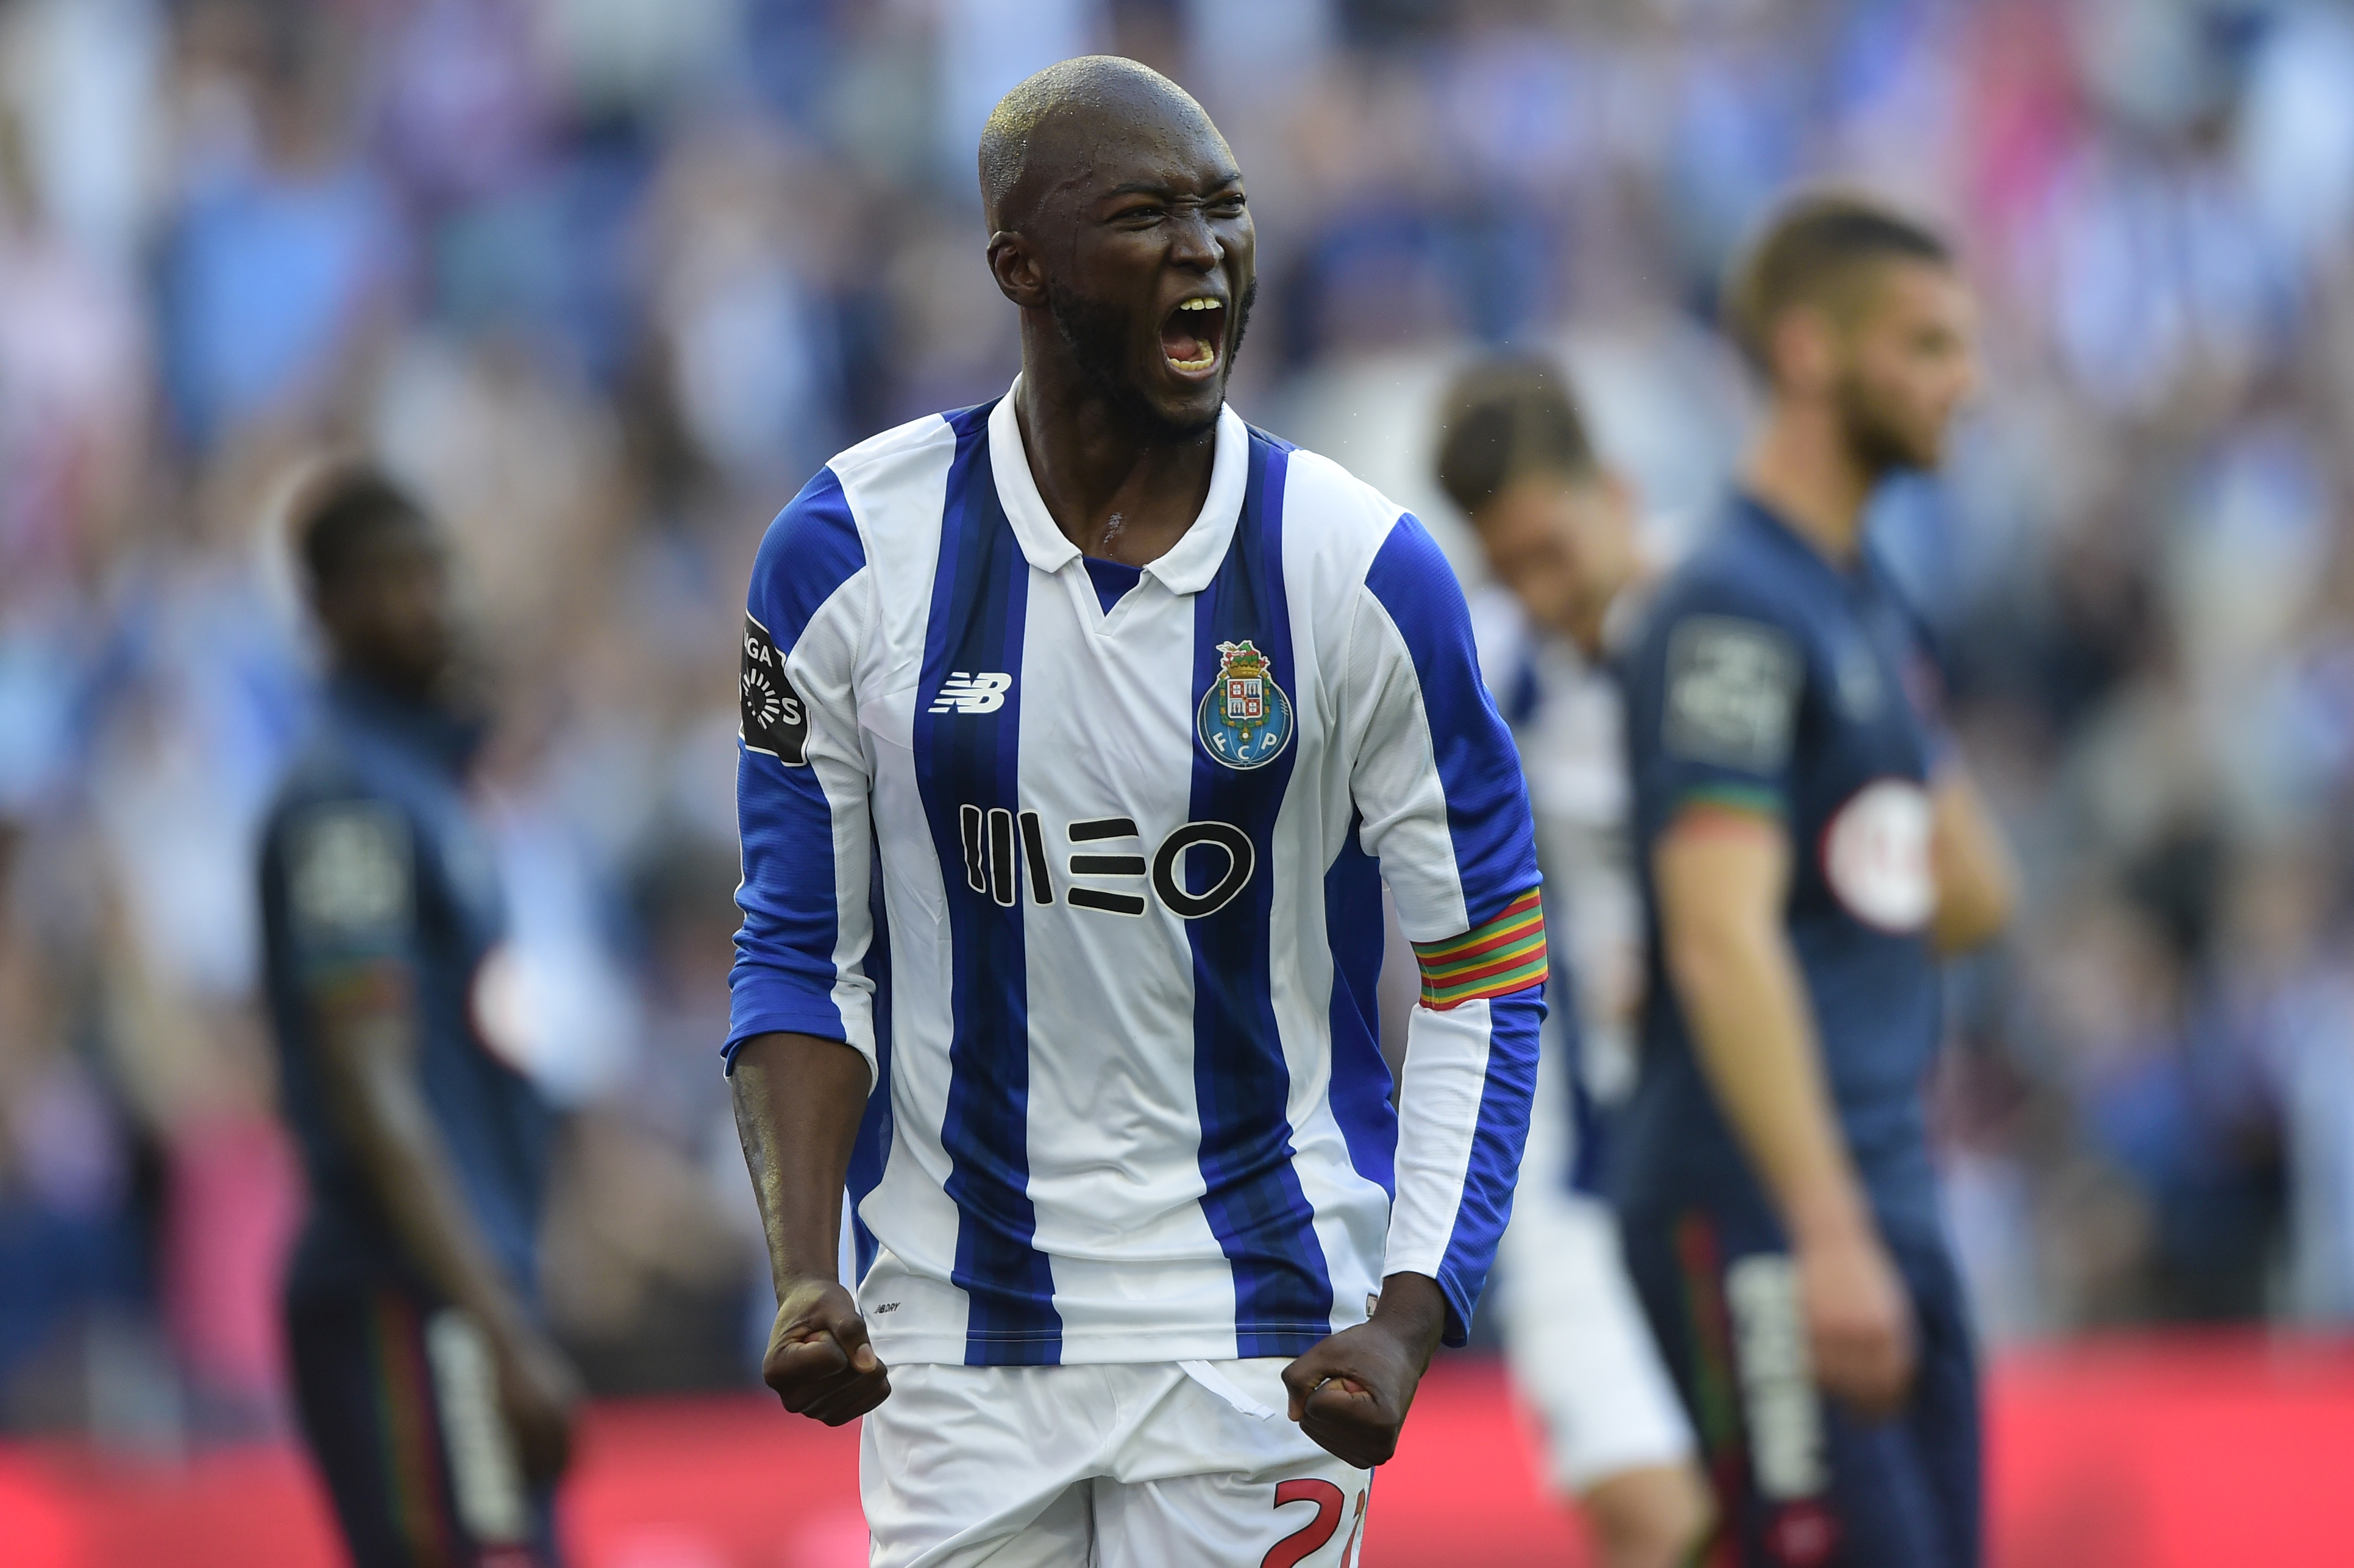 Danilo Pereira seems keen to join Arsenal (Photo by MIGUEL RIOPA/AFP/Getty Images)